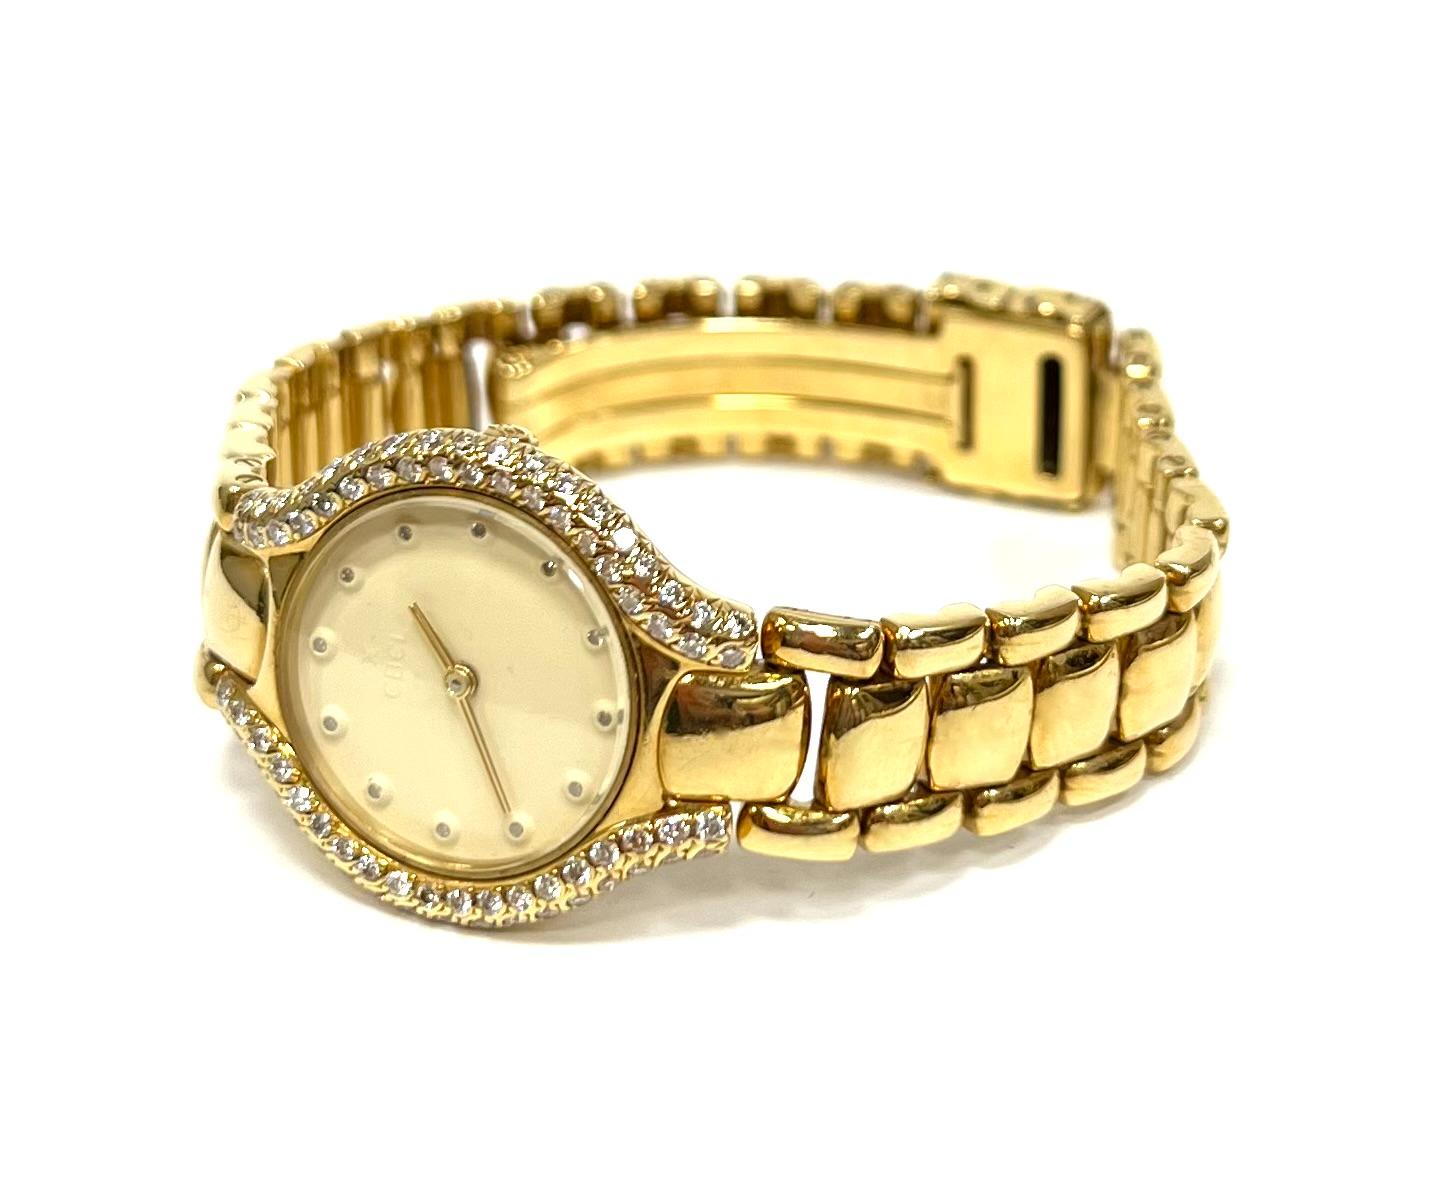 This is a beautiful  ladies wrist watch by Ebel in the Beluga design. The case and fancy link band is crafted from 18k yellow gold, white face with diamond hourmarkers and diamond bezel, all totaling 1 carat. Gold tone hands with sapphire crystal.